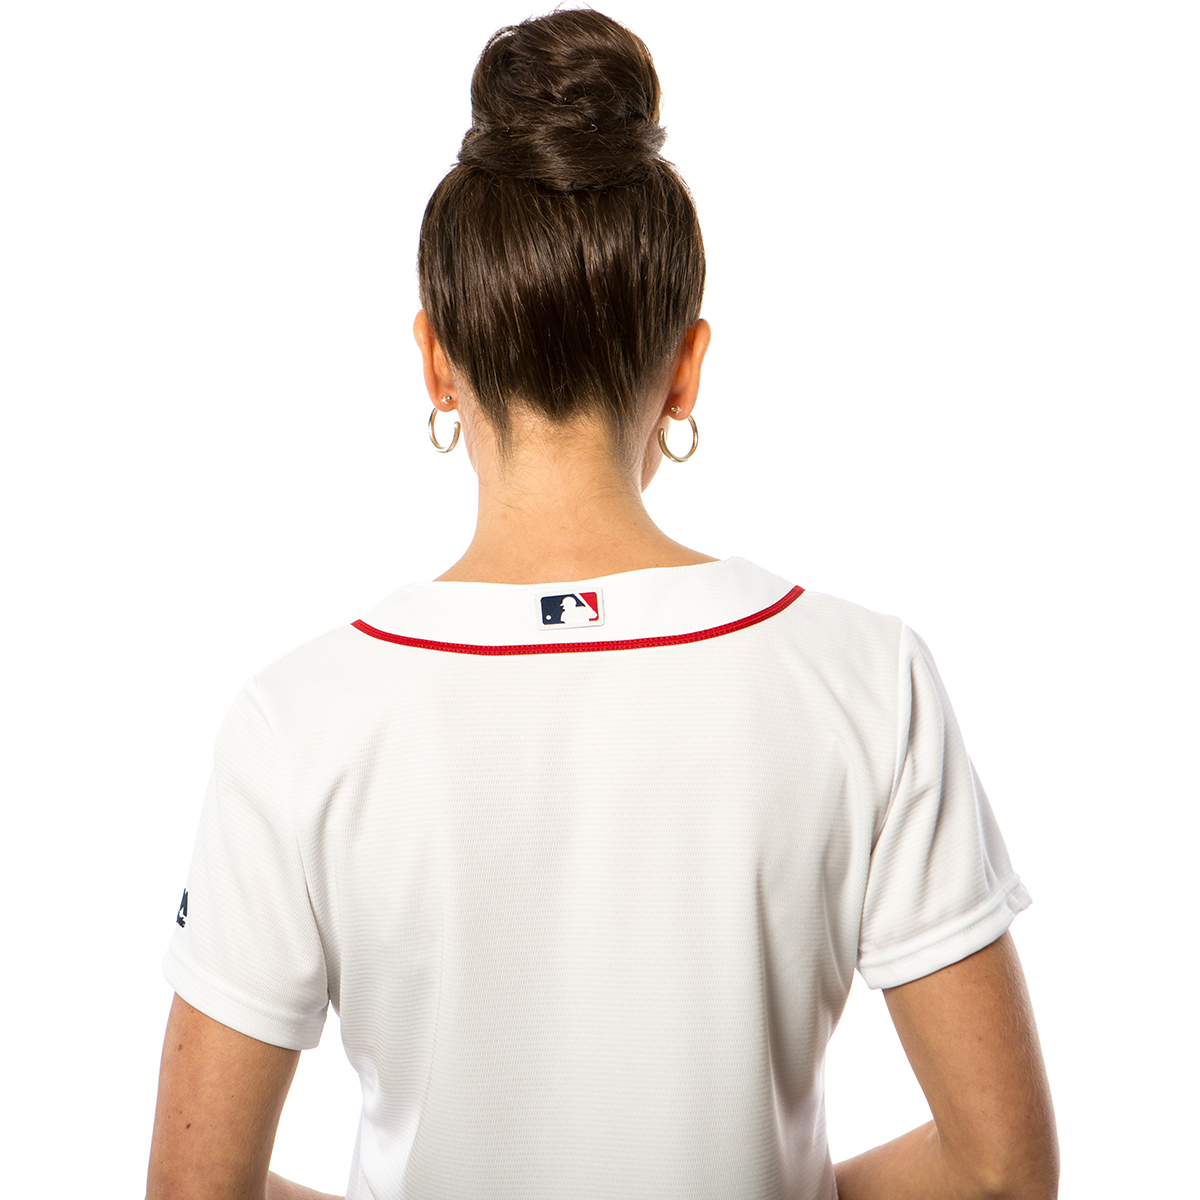 BOSTON RED SOX Women's Cool Base Home Jersey - Bob's Stores